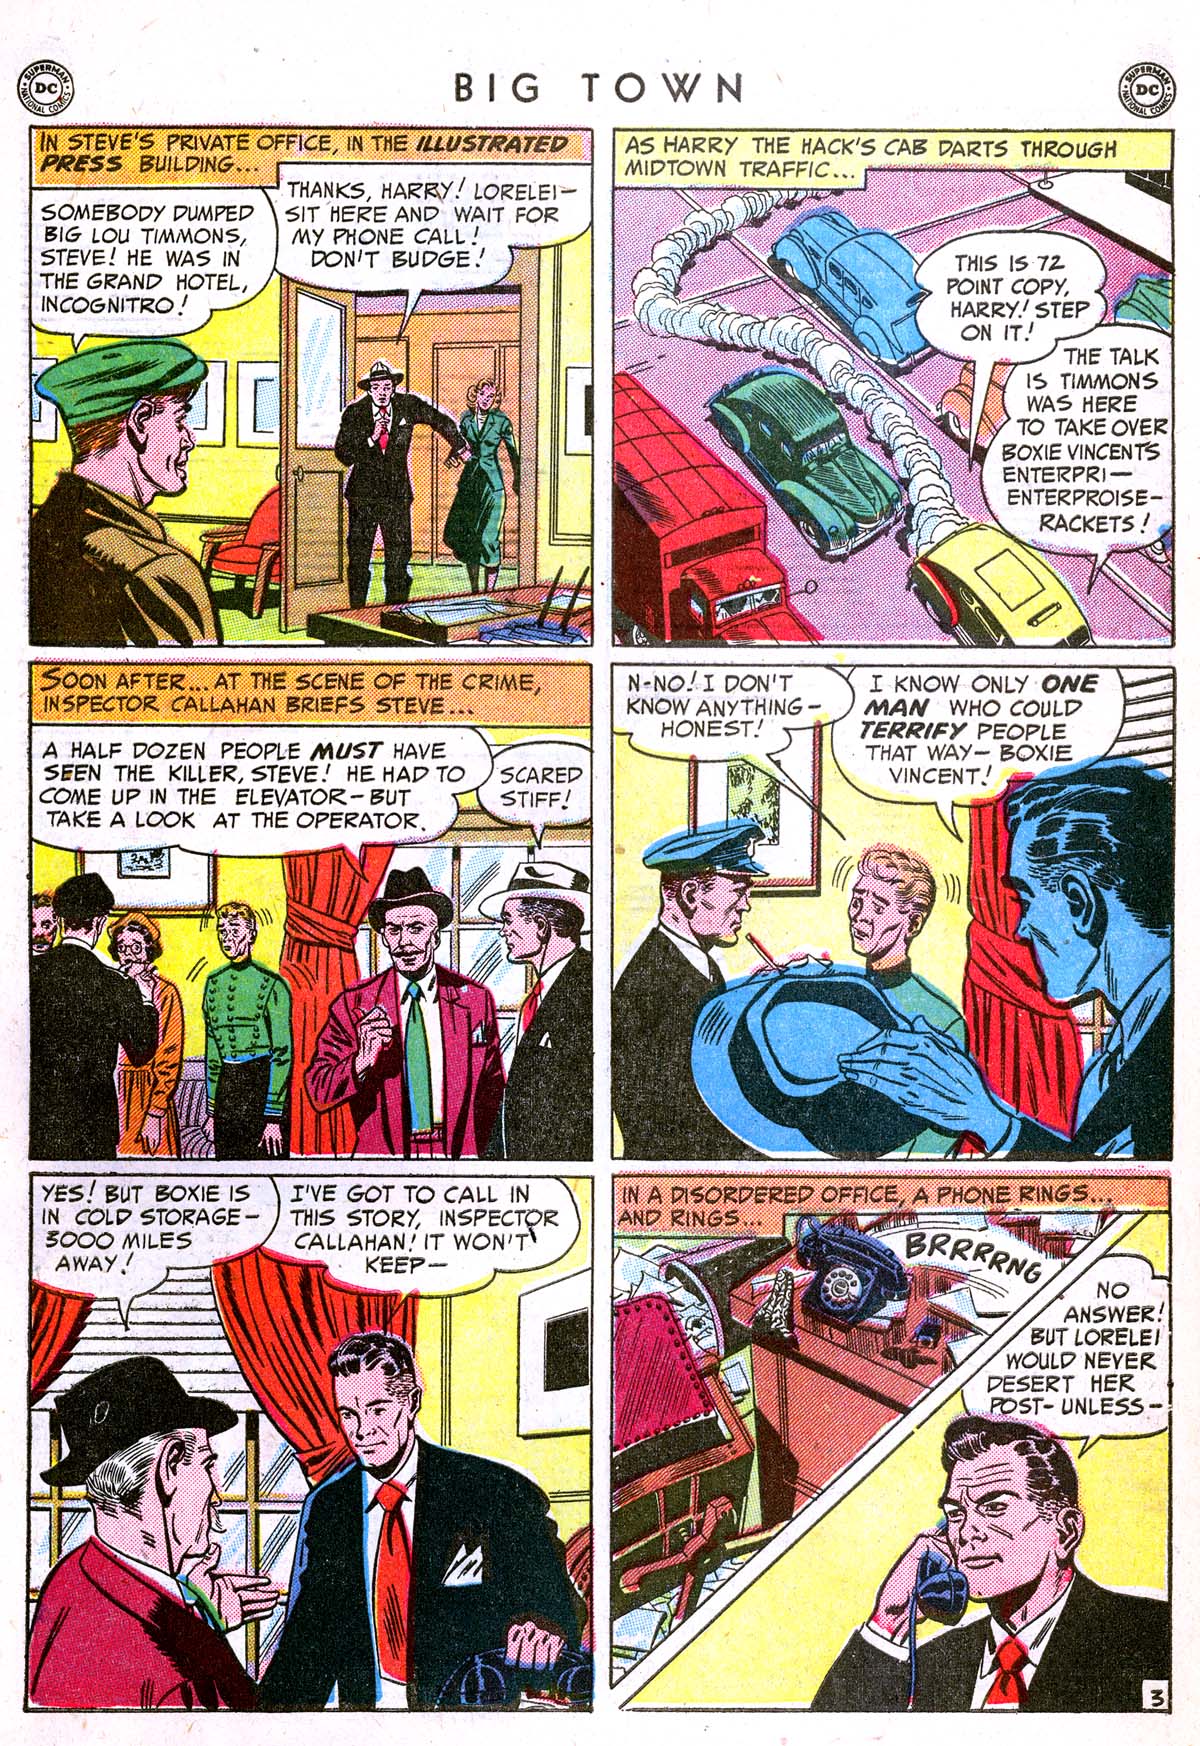 Big Town (1951) 4 Page 4